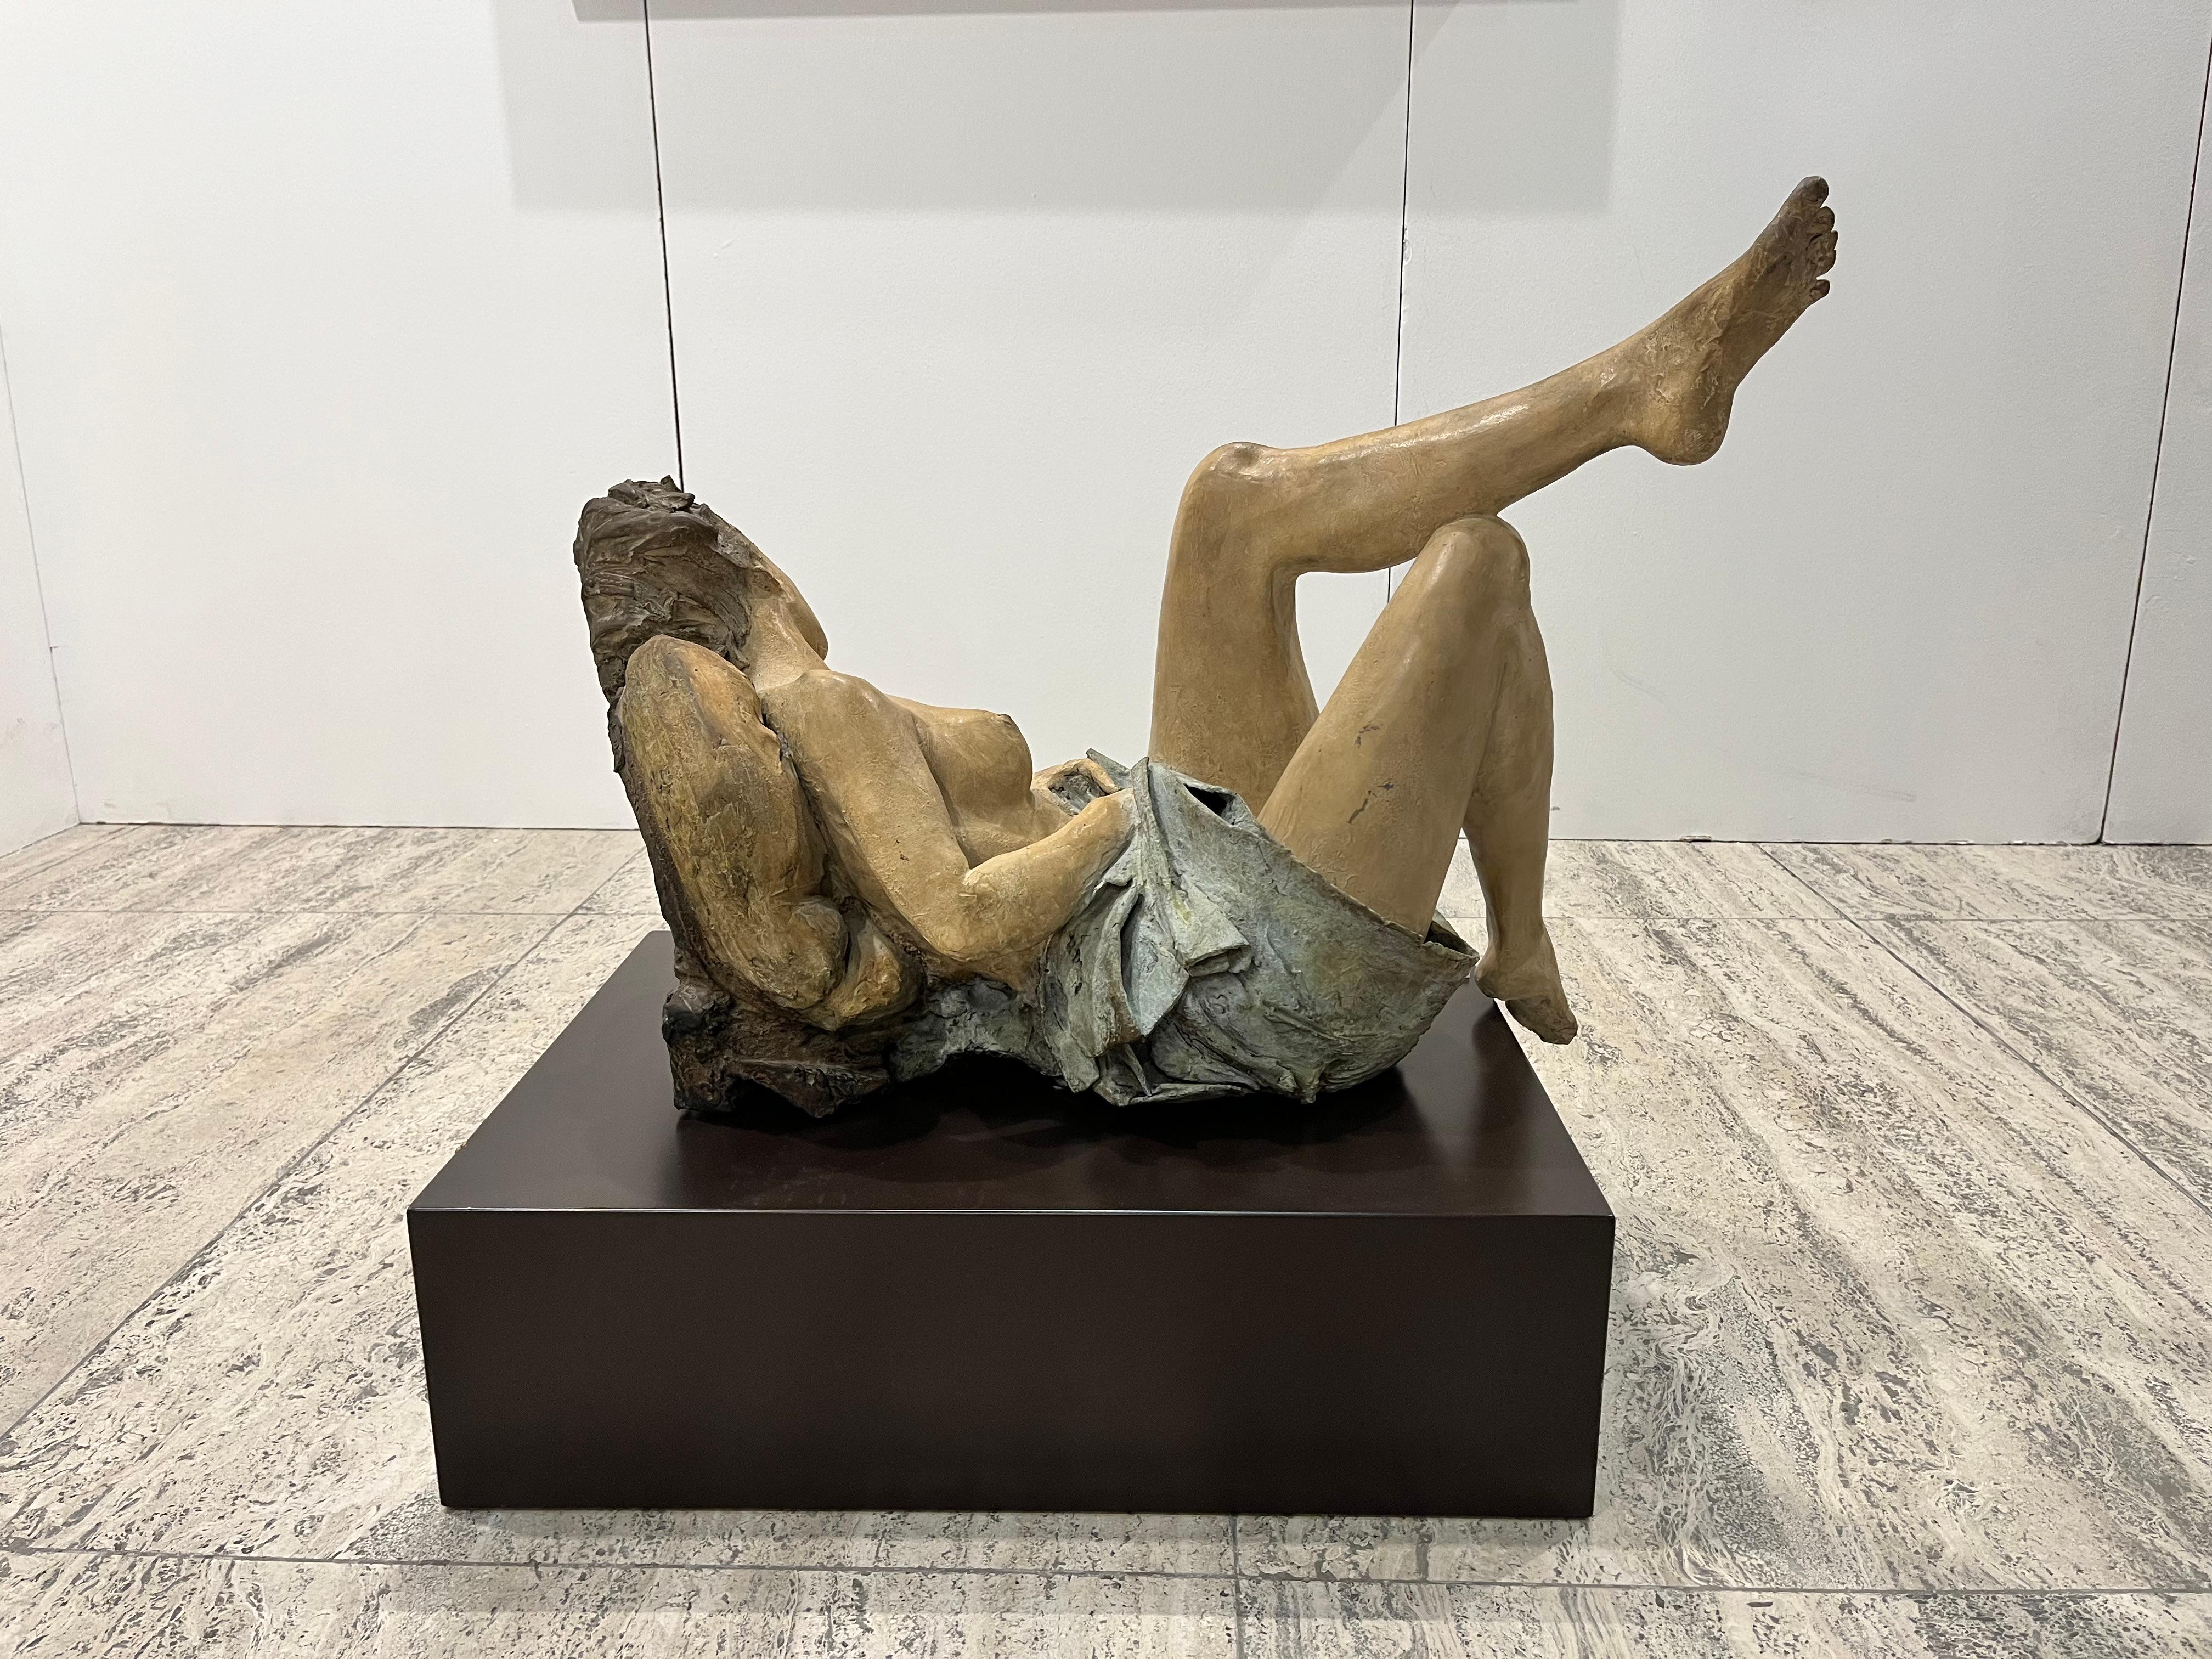 Fine beauty female nude sculpture in bronze, patina ochre and azur, dust blue - Sculpture by Ugo Riva